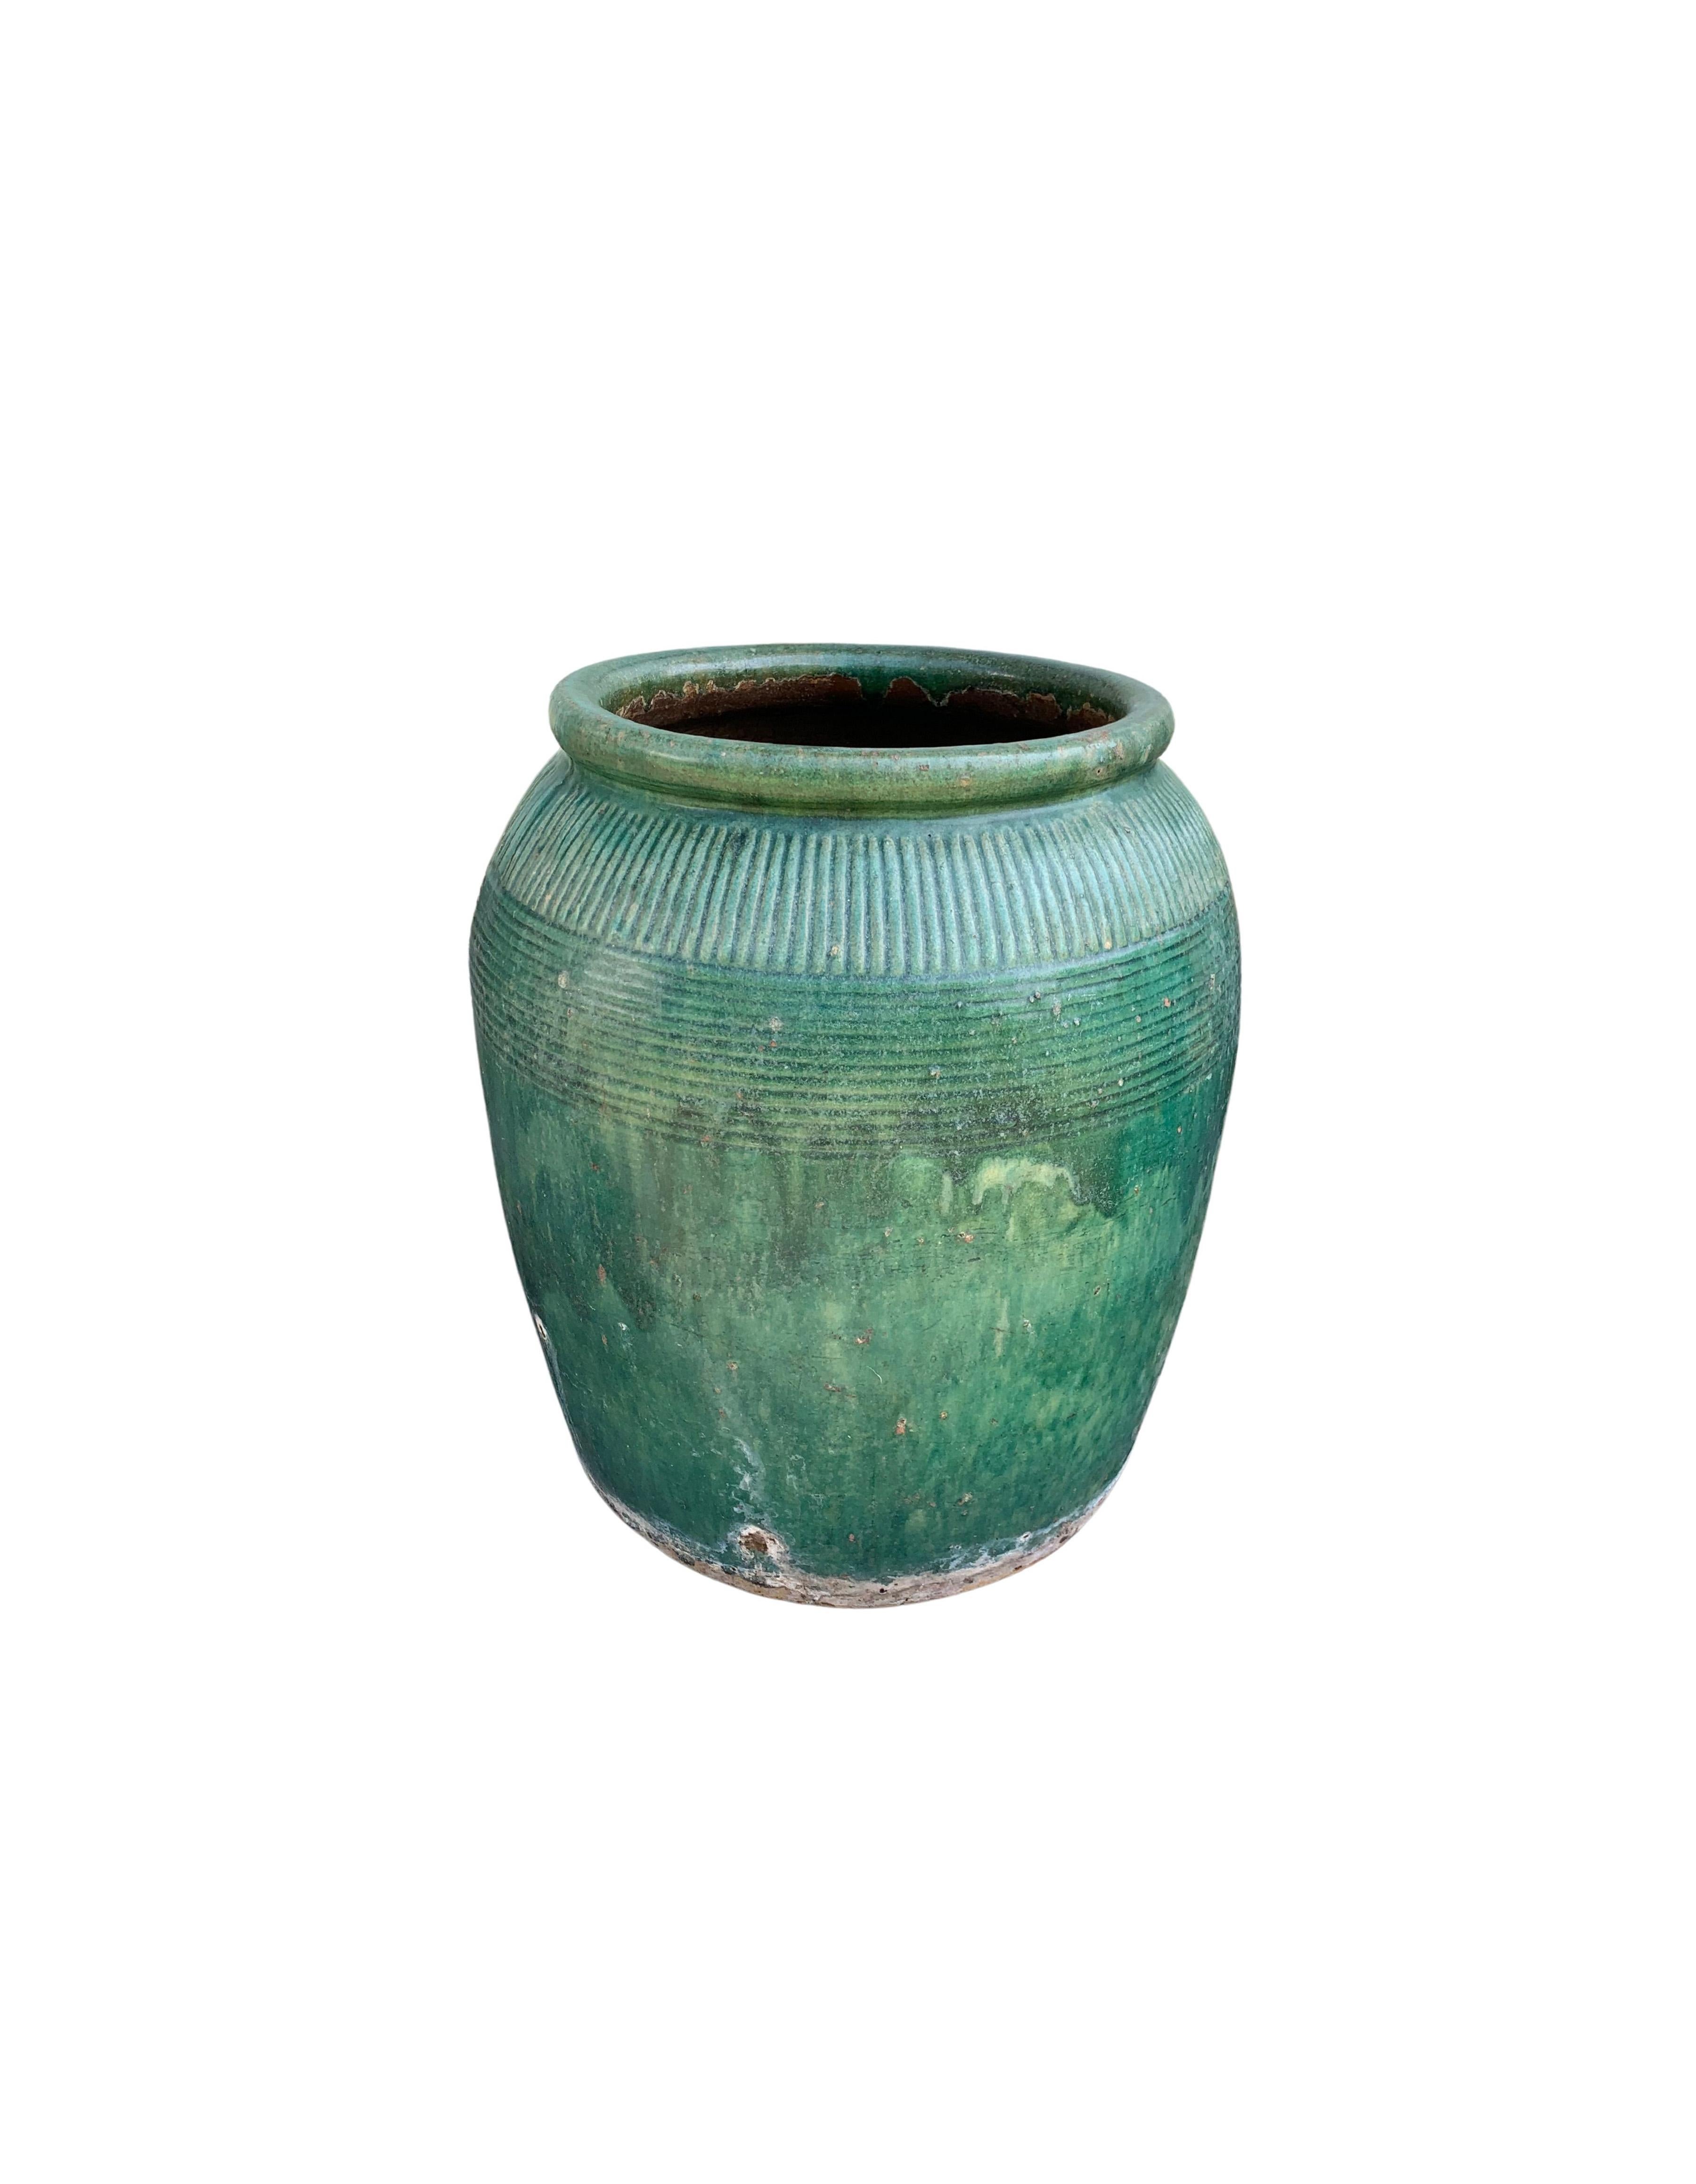 Antique Chinese Green Glazed Ceramic Soy Sauce Jar, c. 1900 For Sale 3